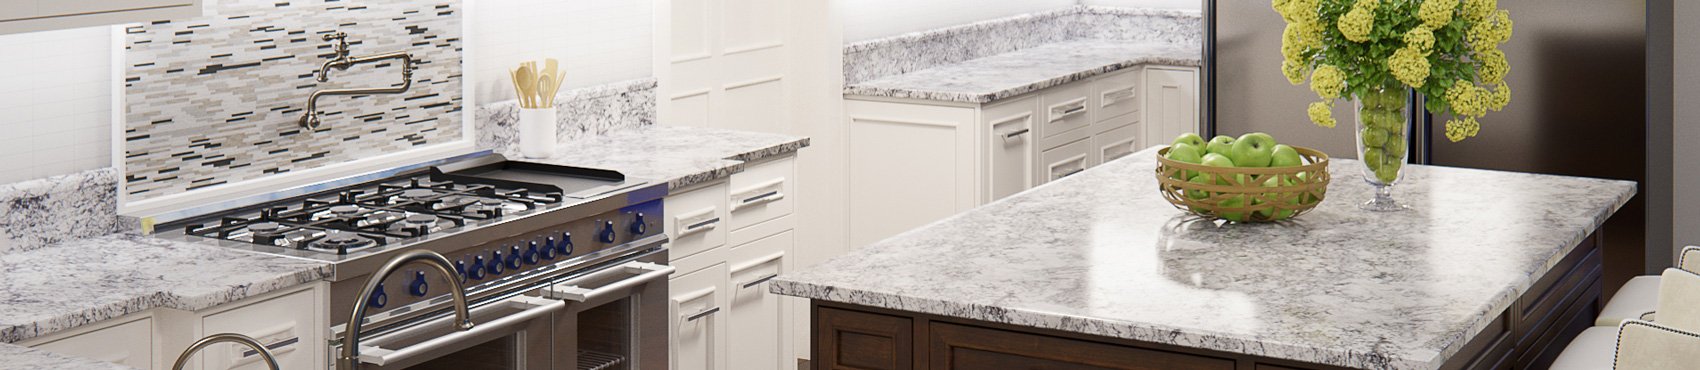 Granite Countertop Care Cleaning Allen Roth Allen Roth